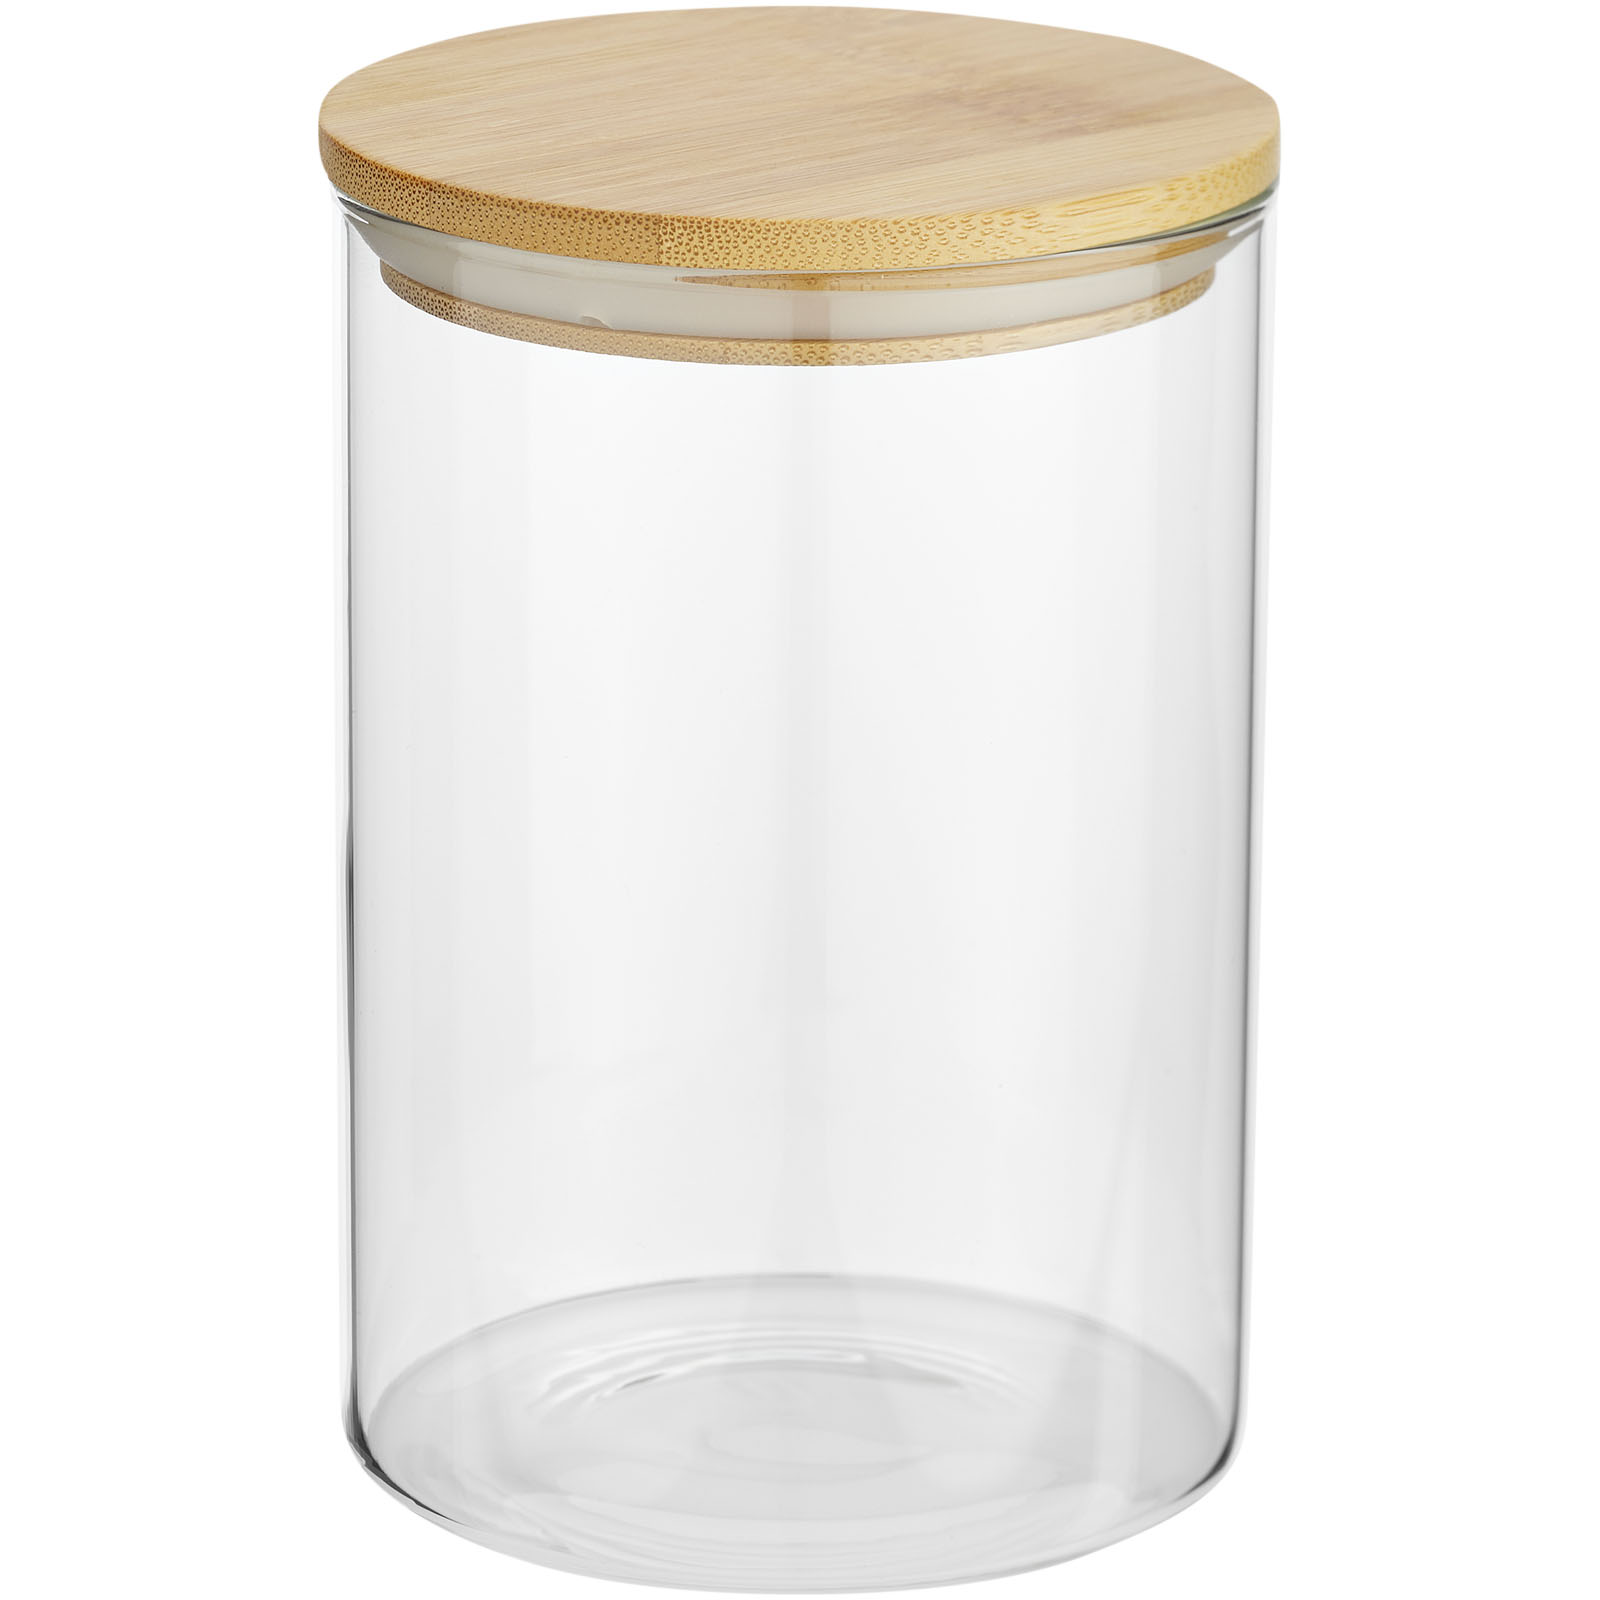 Advertising Kitchenware - Boley 550 ml glass food container